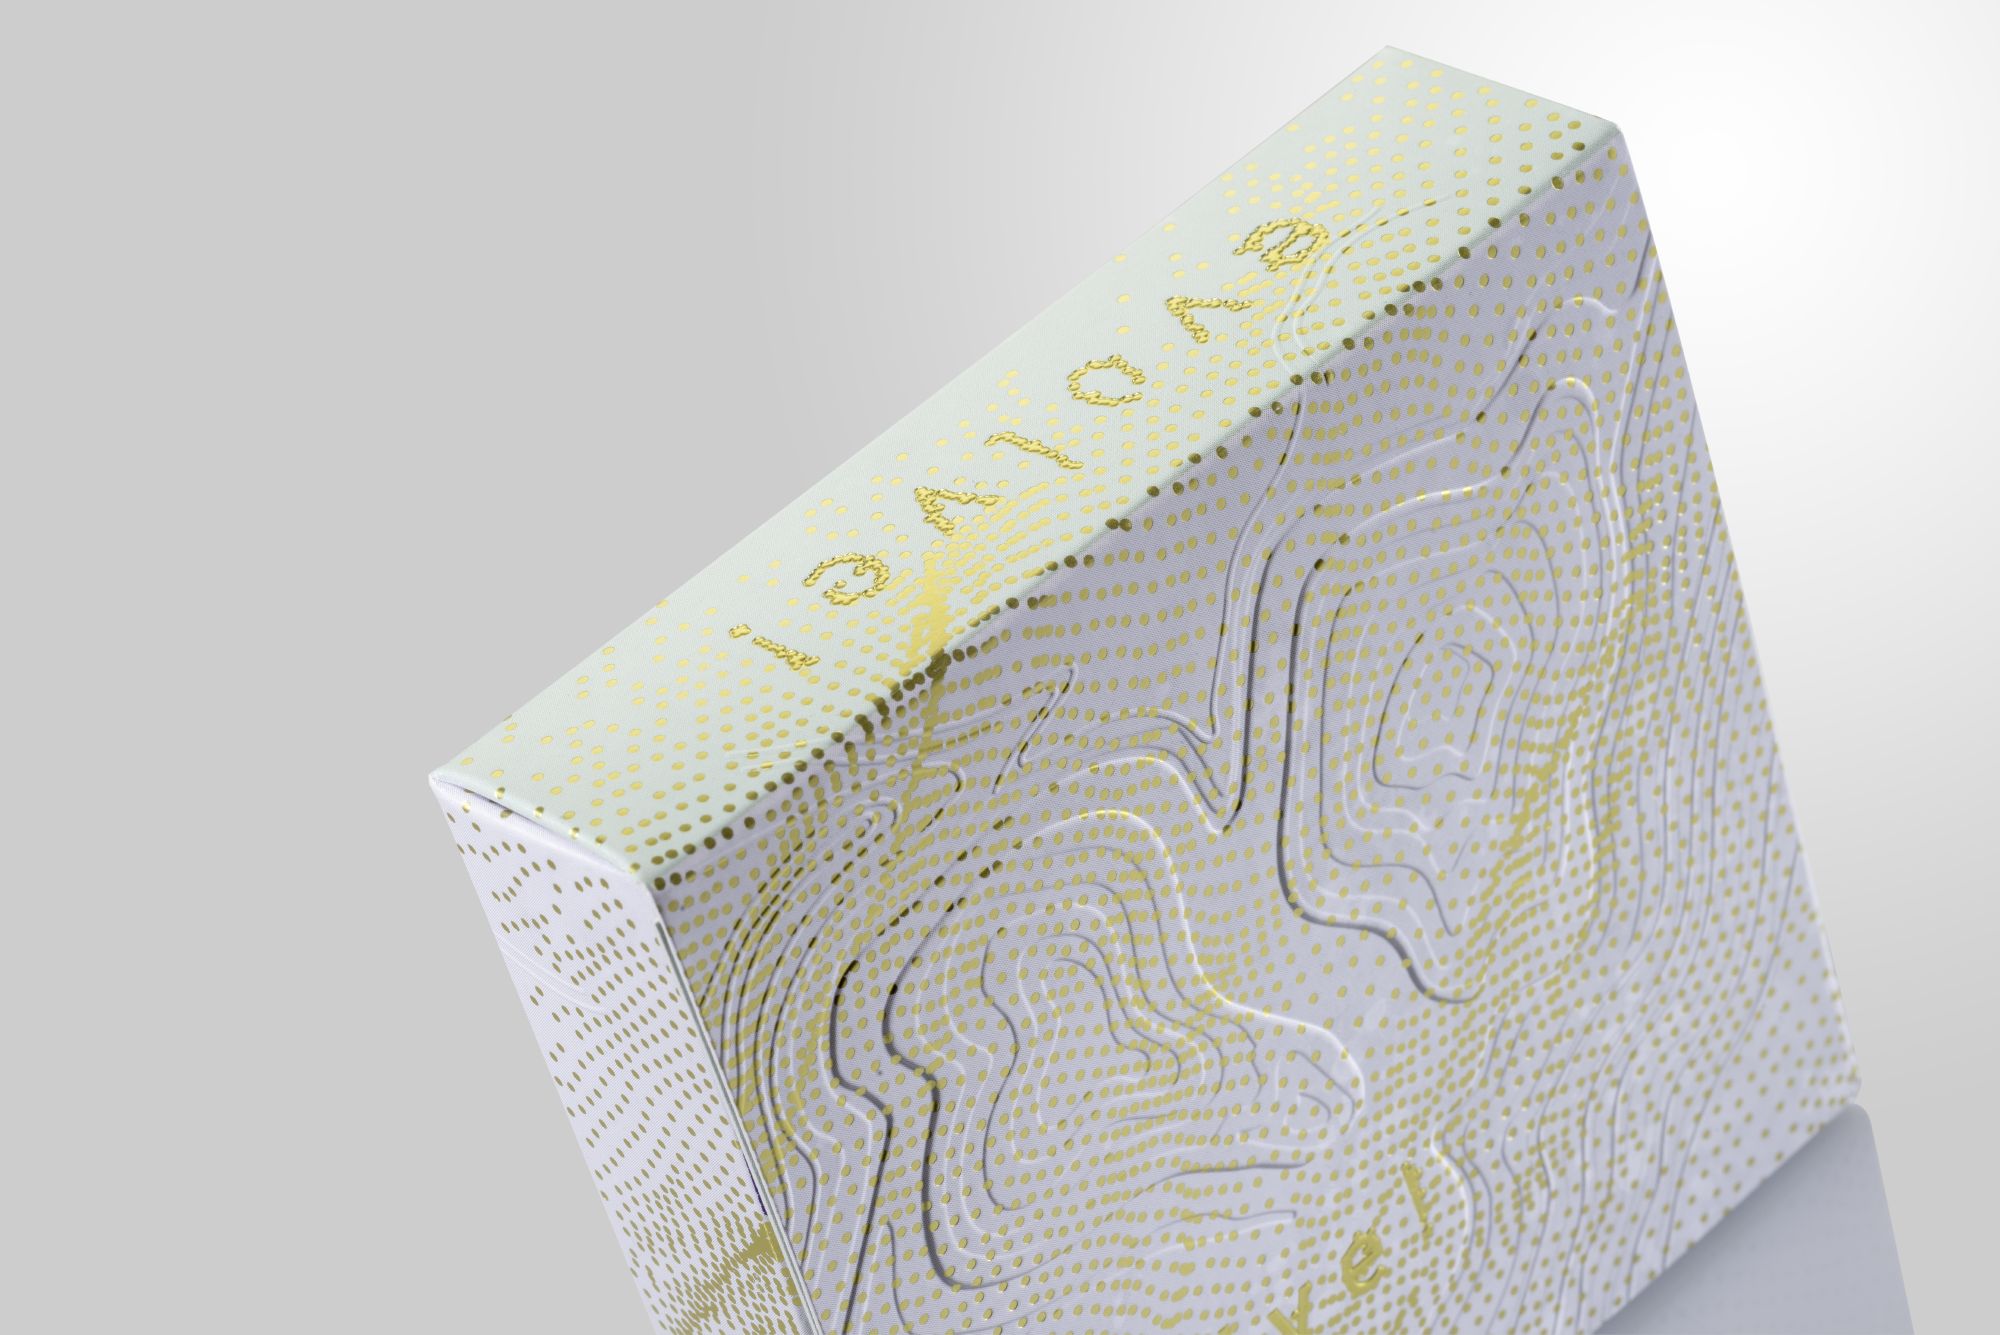 Foiling and embossing on packaging provide a luxury finish for premium goods